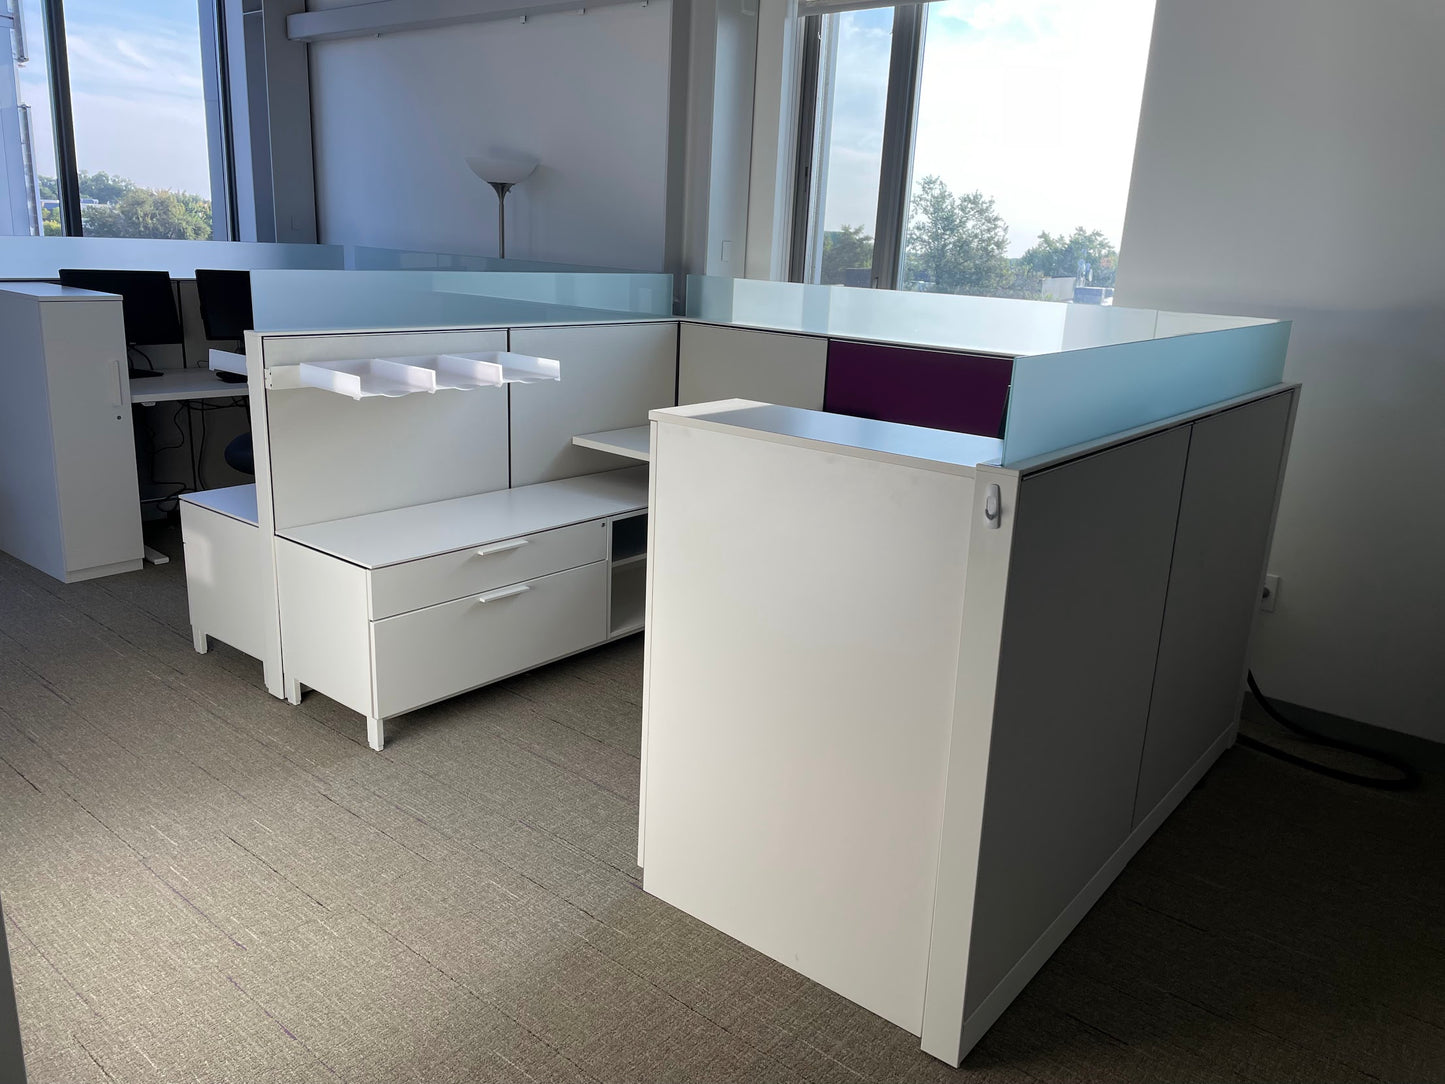 Load image into Gallery viewer, Picture of Herman miller canvas cubicle system with white and purple panels and frosted glass
